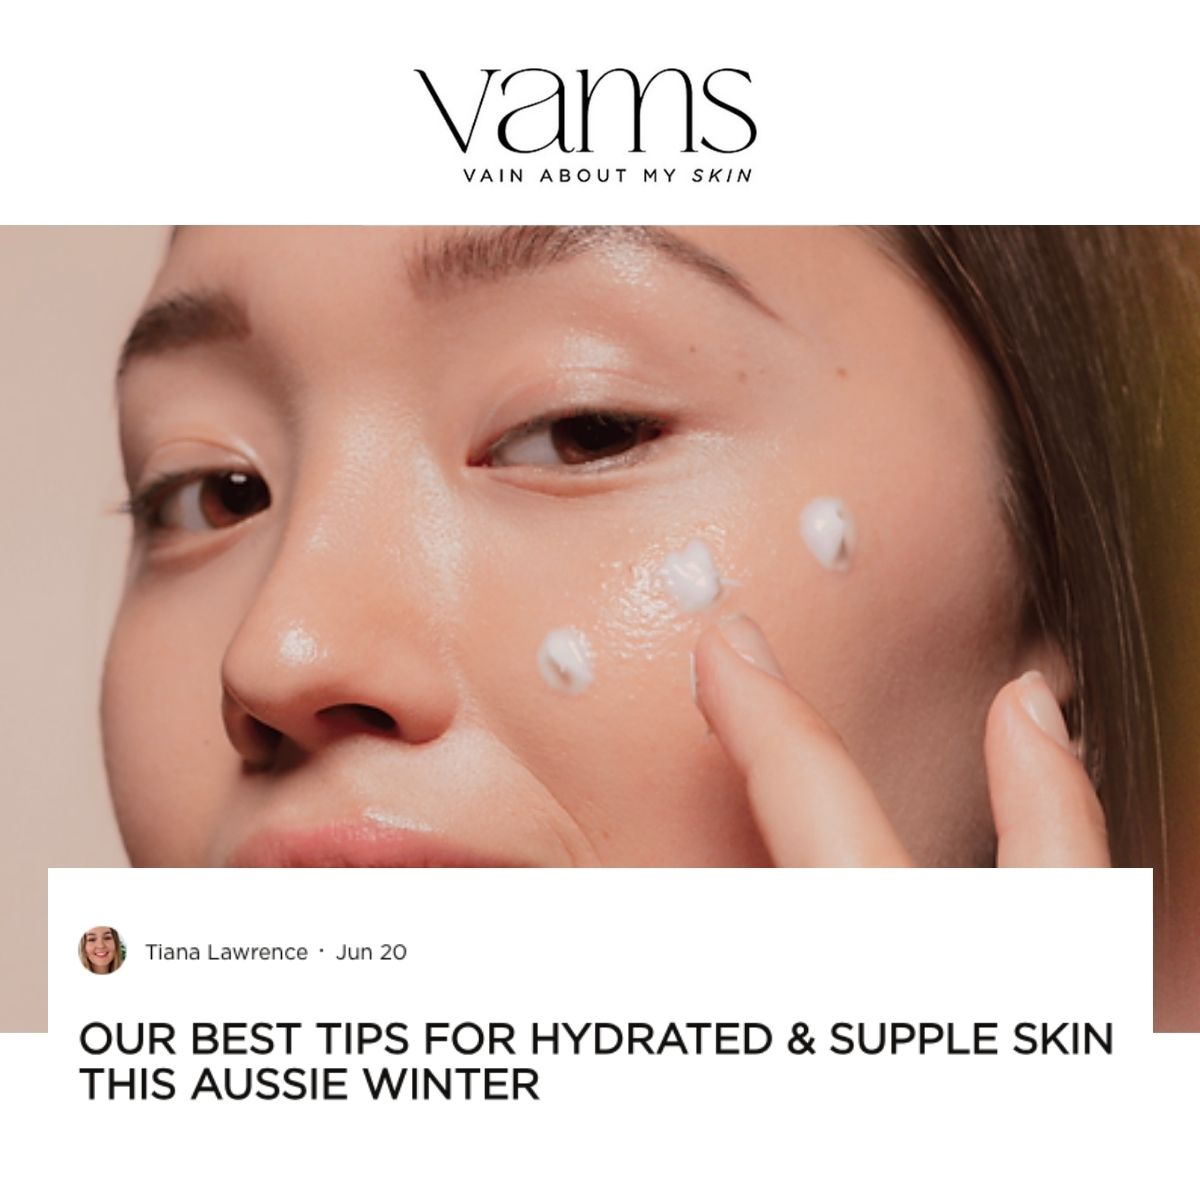 These Are Our Best Tips for Hydrated & Supple Skin This Aussie Winter